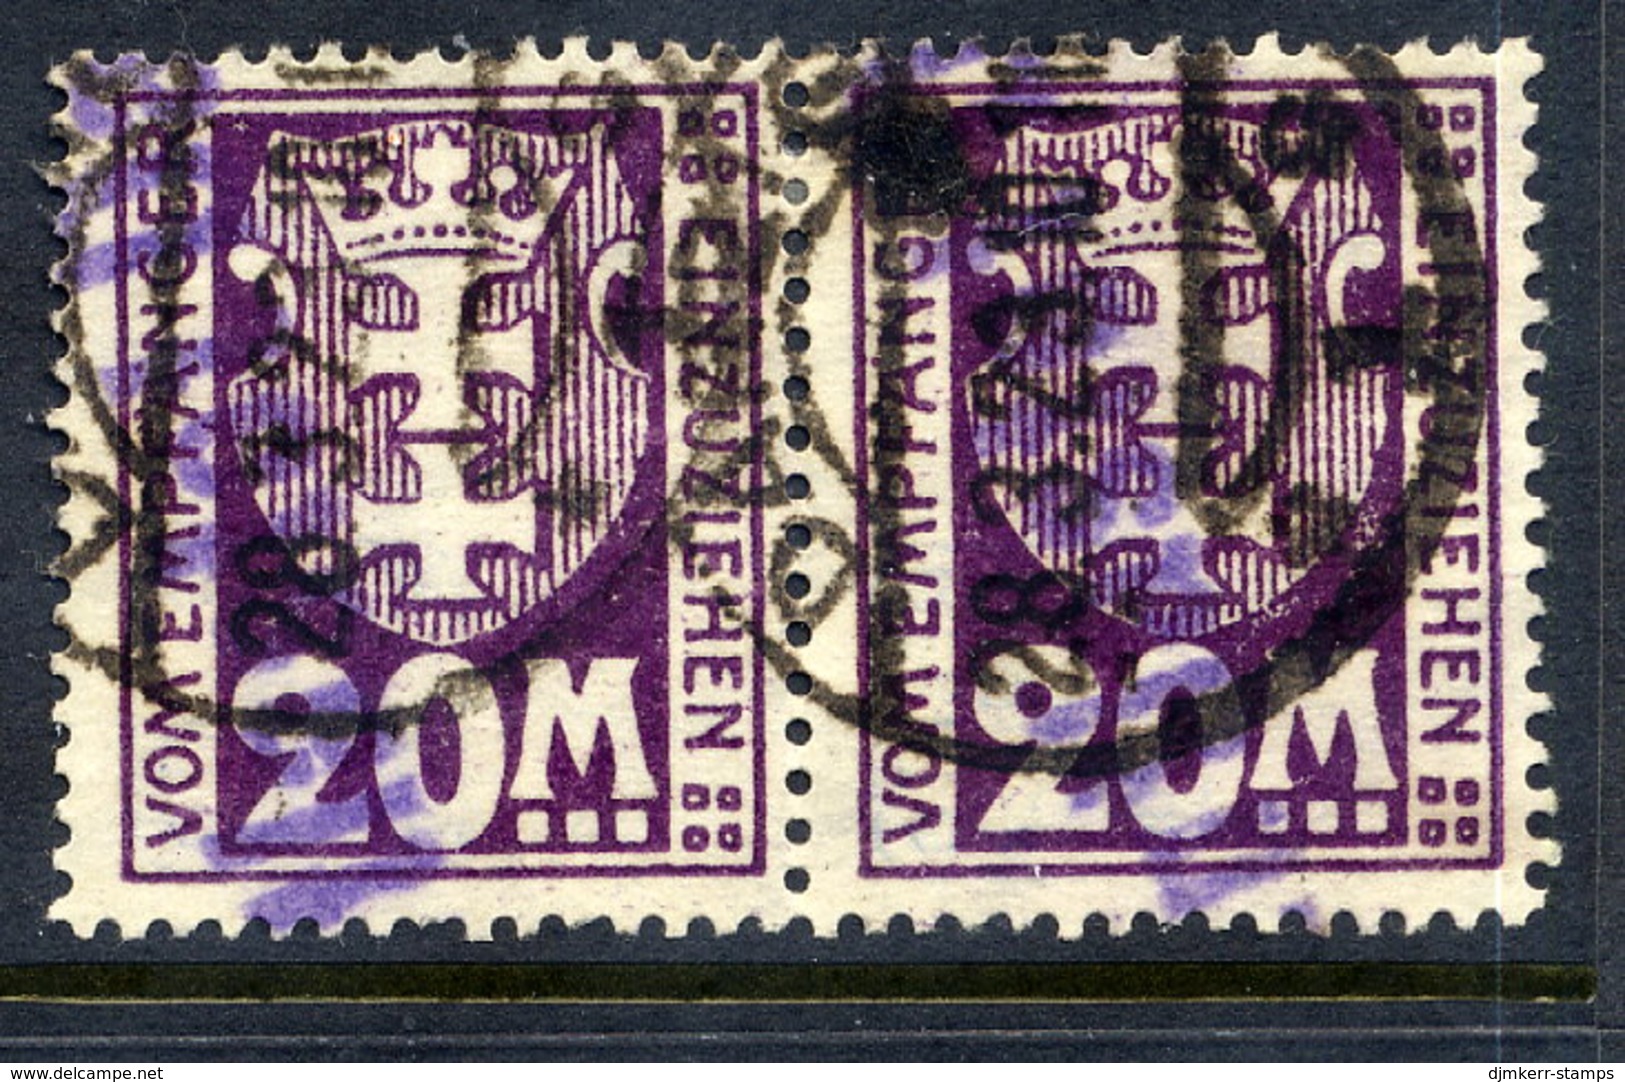 DANZIG 1923 Postage Due 20 Mk. Pair Postally Used, Signed Infla. Michel 22Y €280 - Portomarken